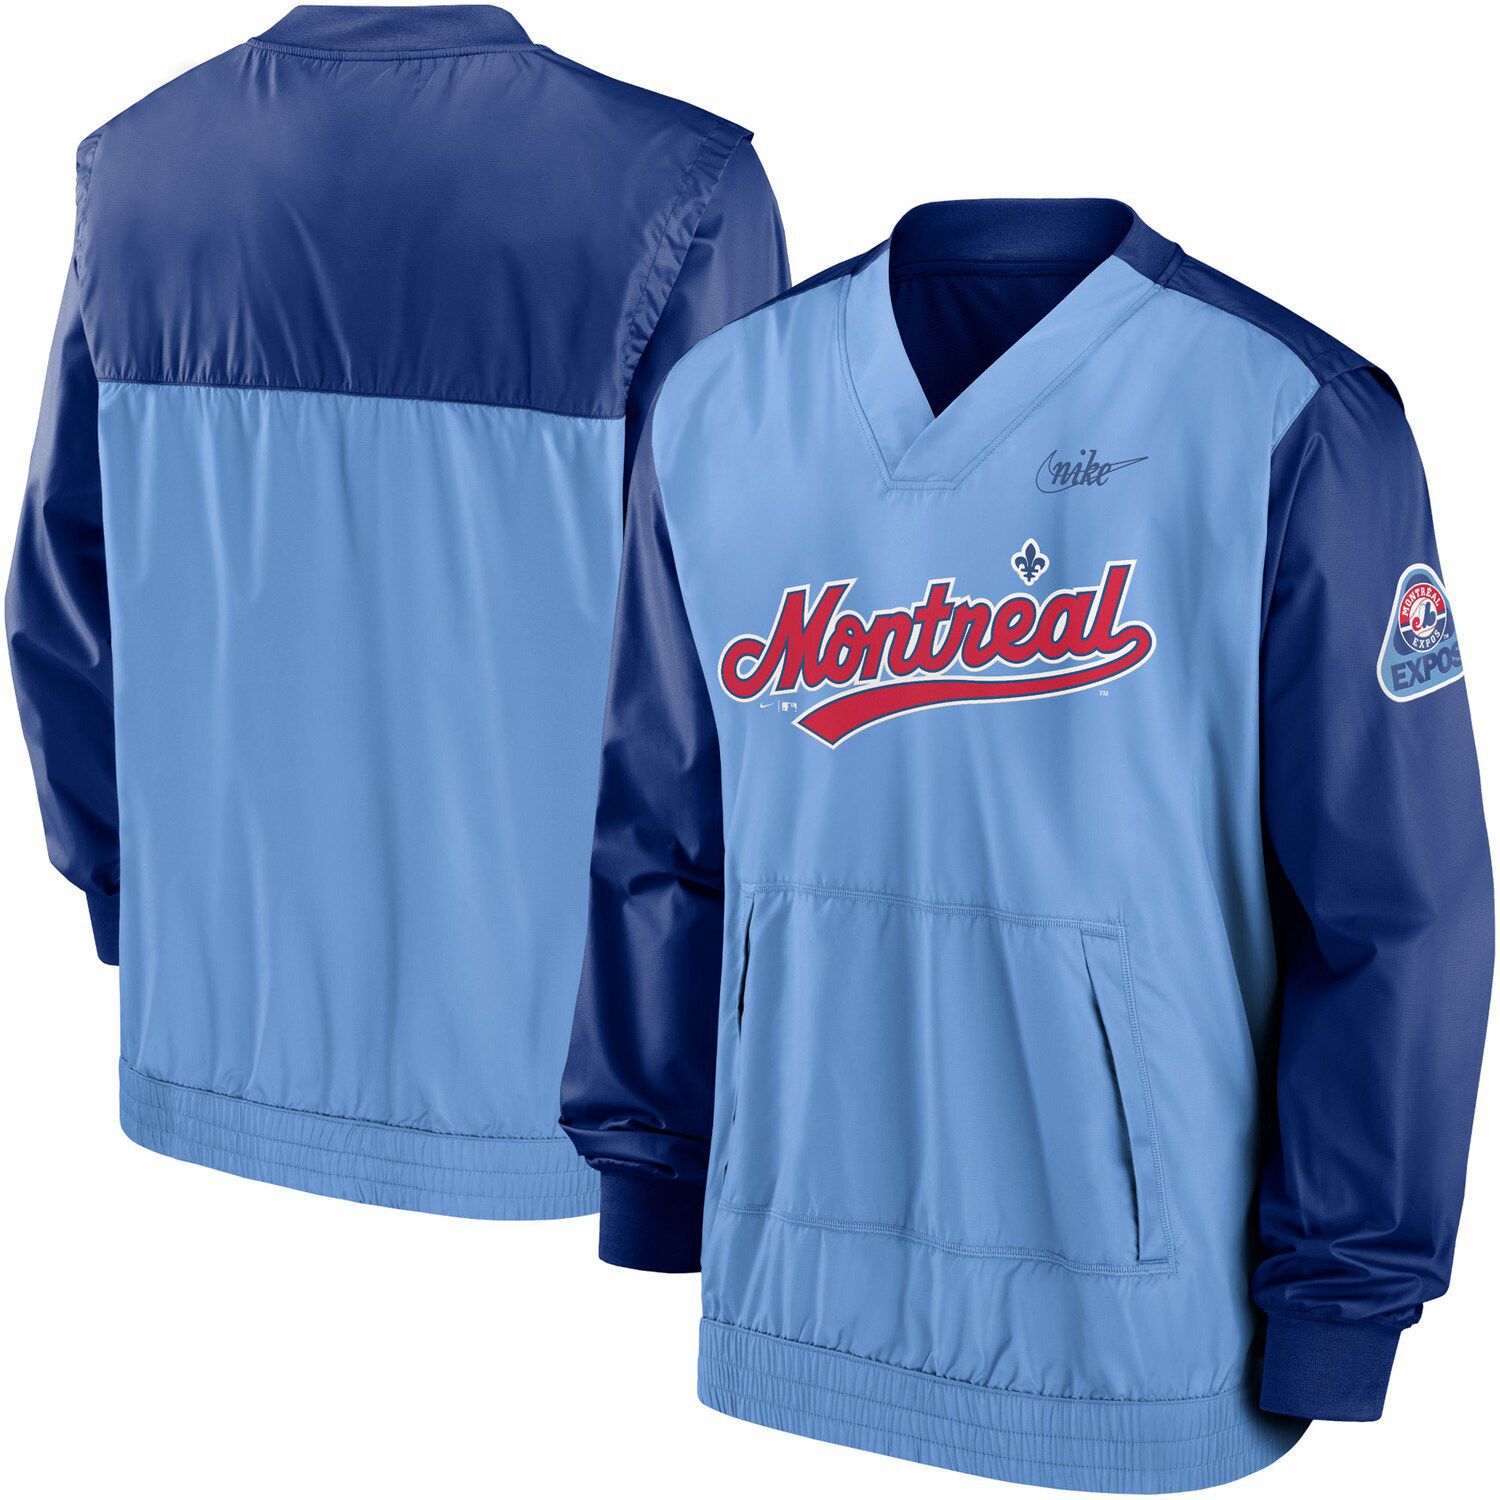 Mitchell & Ness Men's Pedro Martinez Blue Montreal Expos 1997 Cooperstown  Collection Mesh Batting Practice Jersey